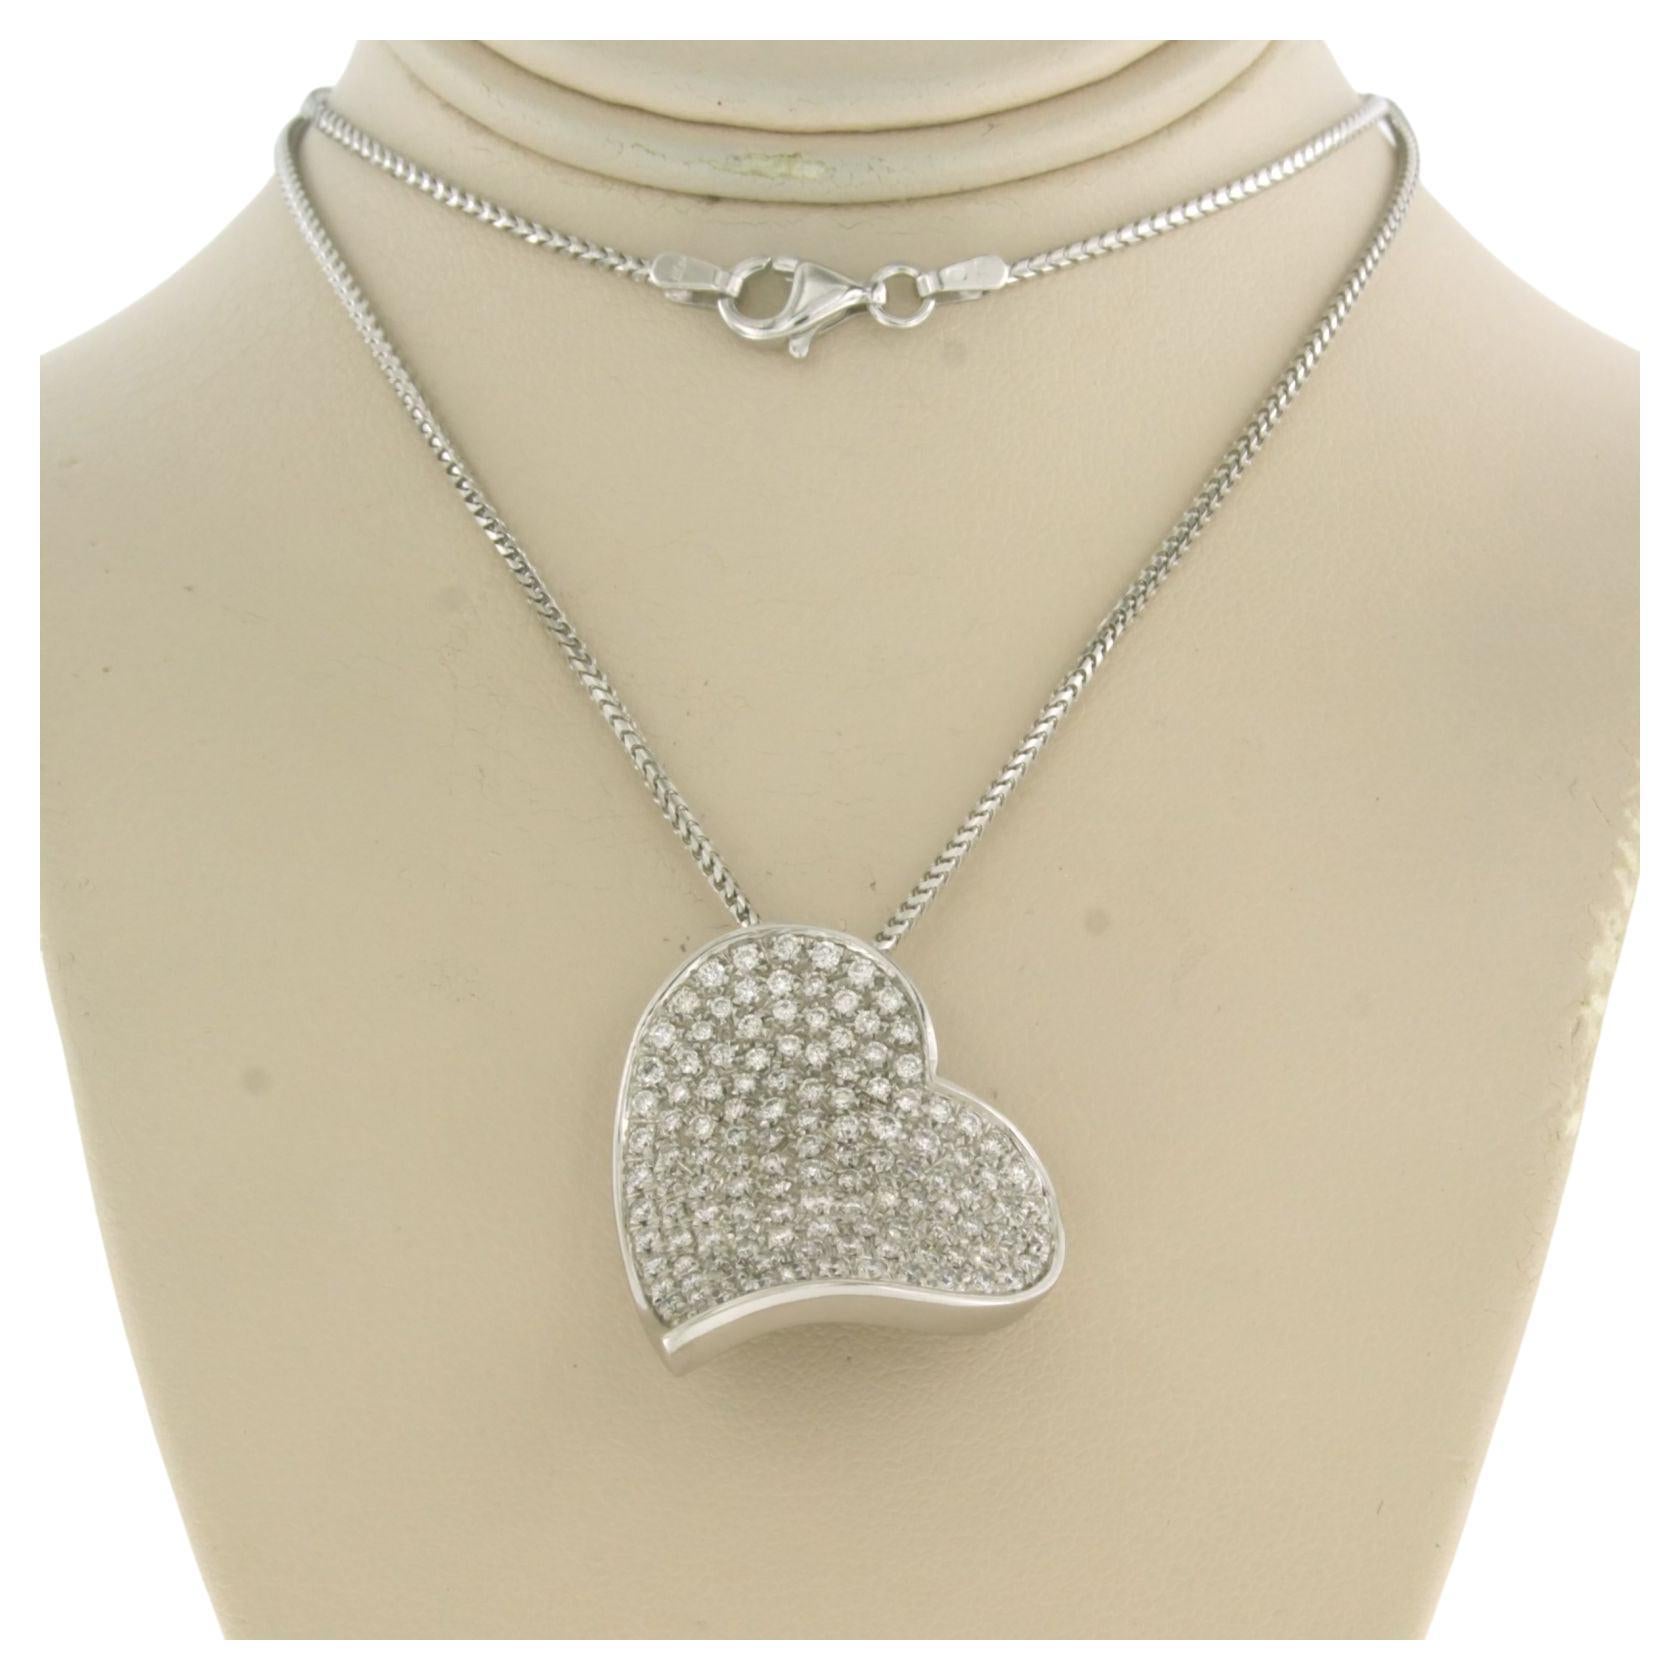 Chain and pendant in shape of a heart set with diamonds 18k white gold For Sale